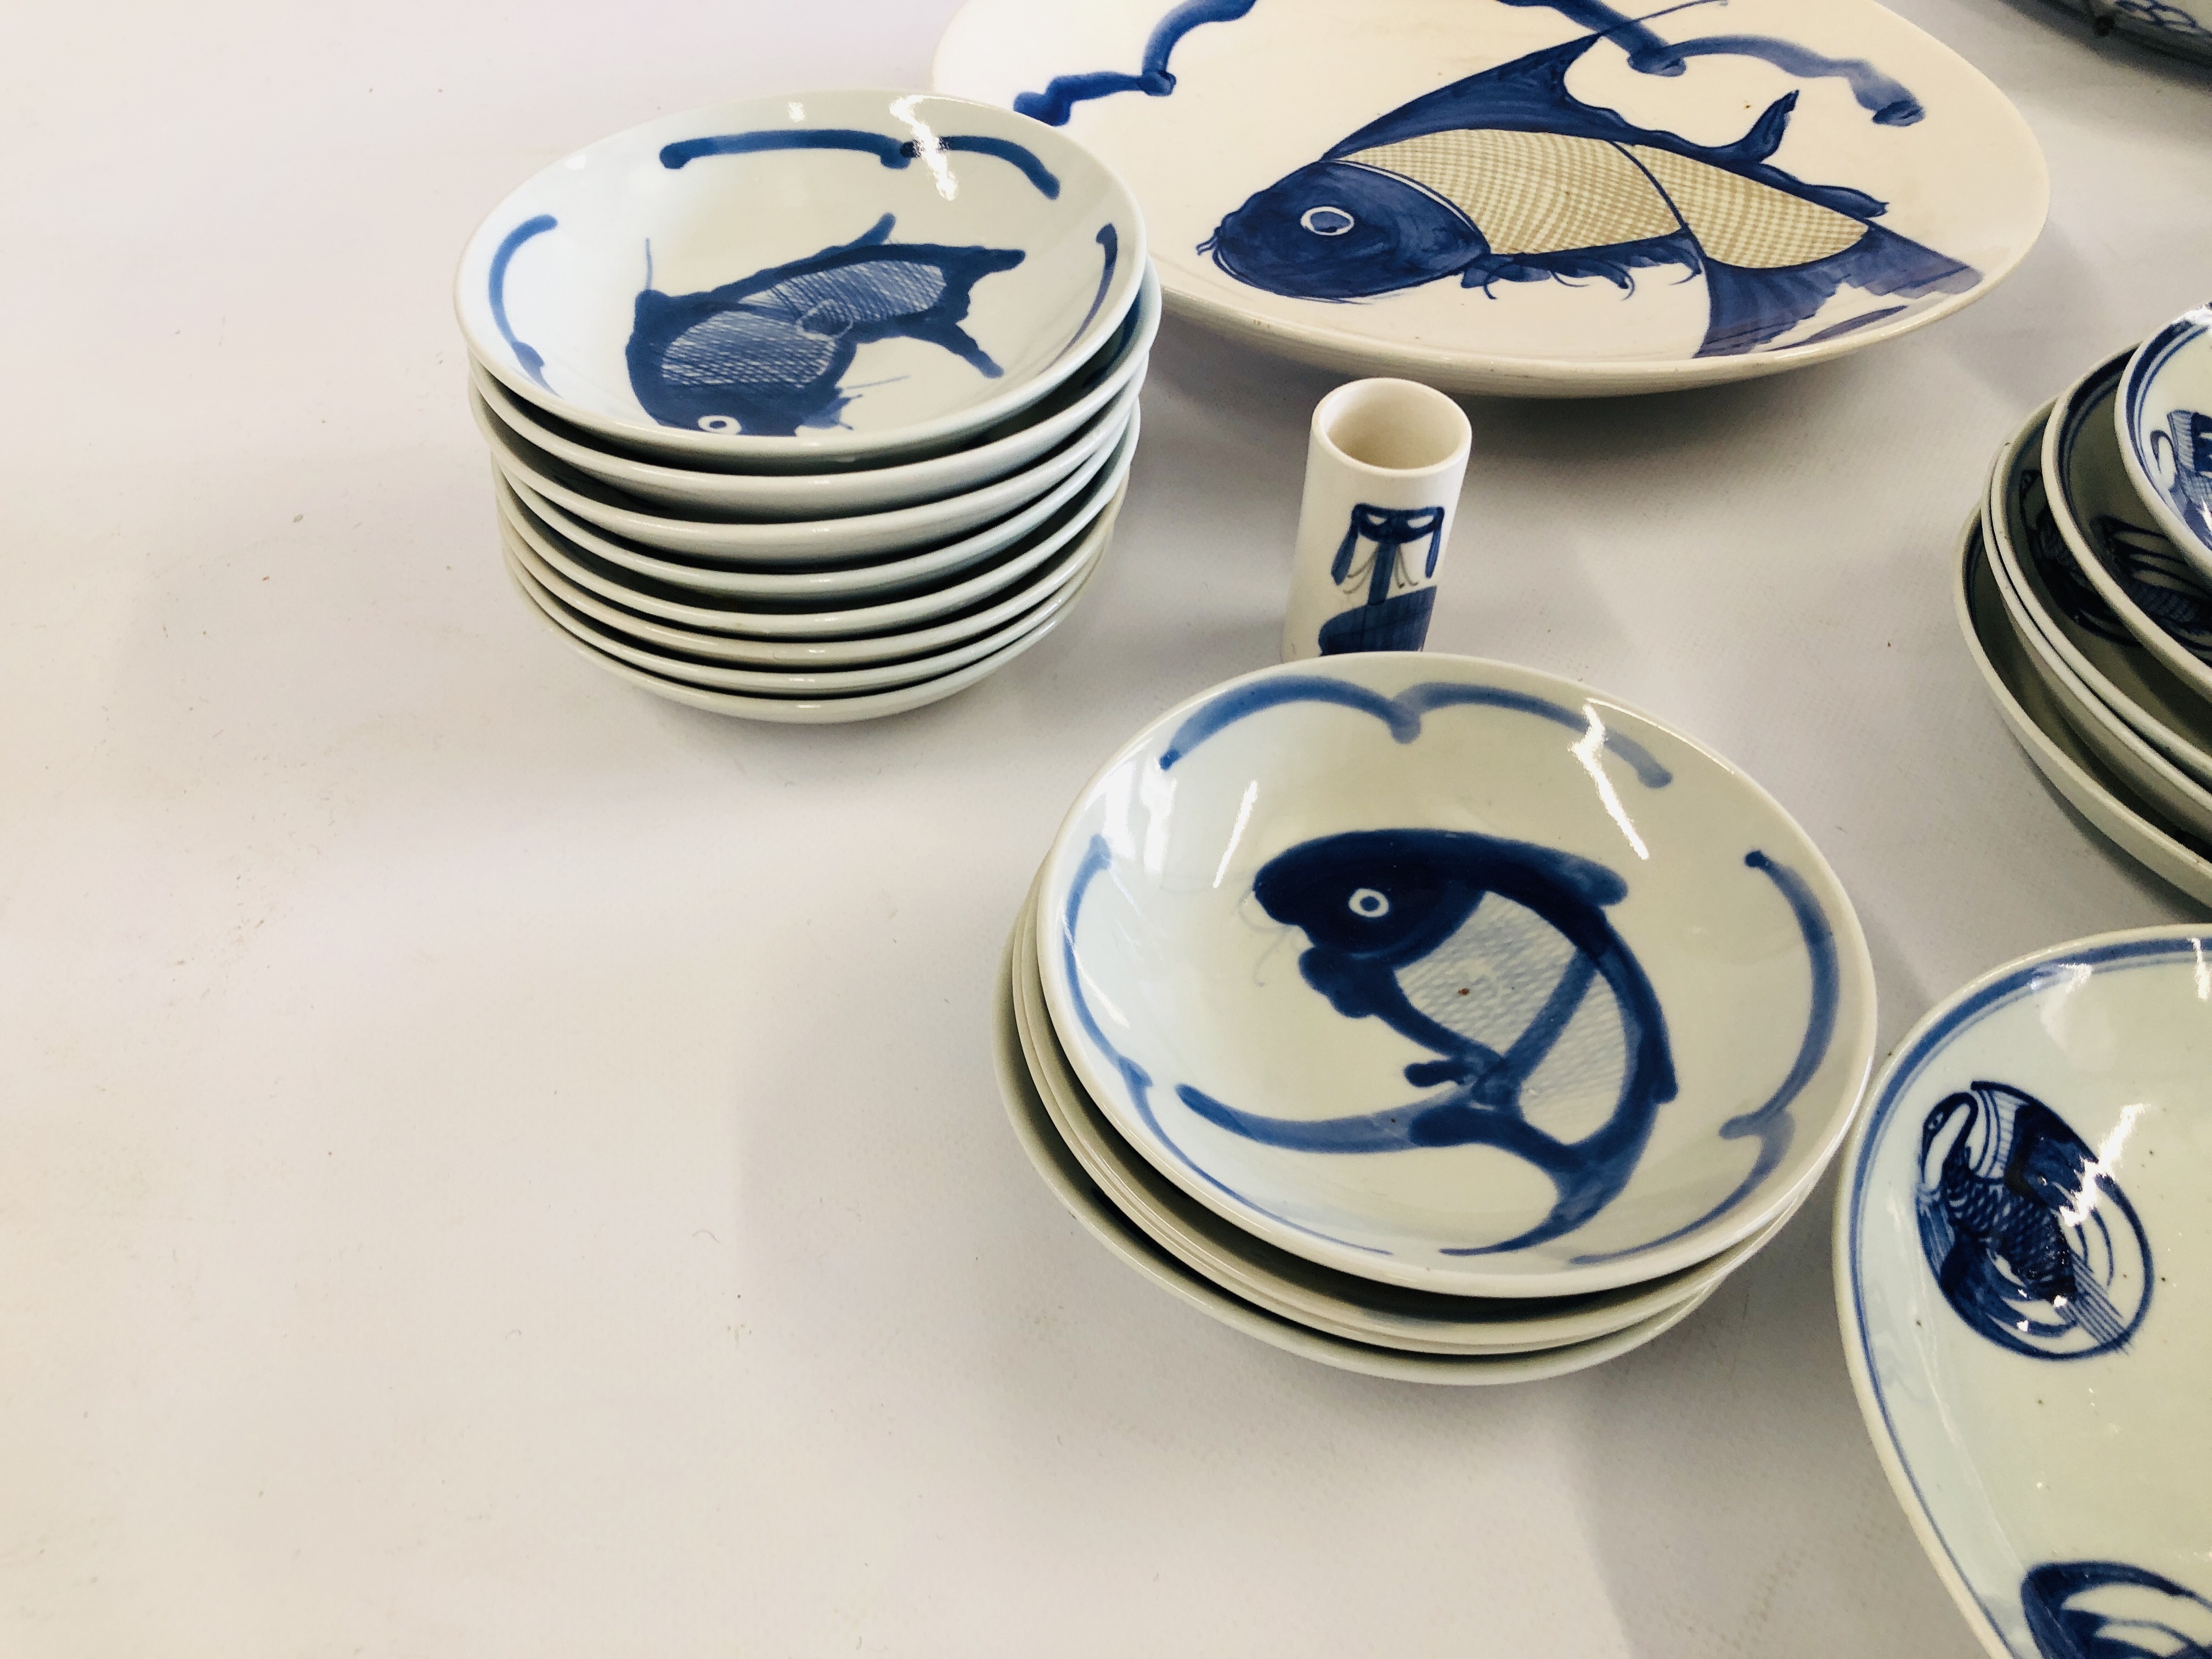 A GROUP OF CHINESE BLUE AND WHITE PLATES AND DISHES DECORATED WITH A FISH SYMBOL ALONG WITH A - Image 7 of 14